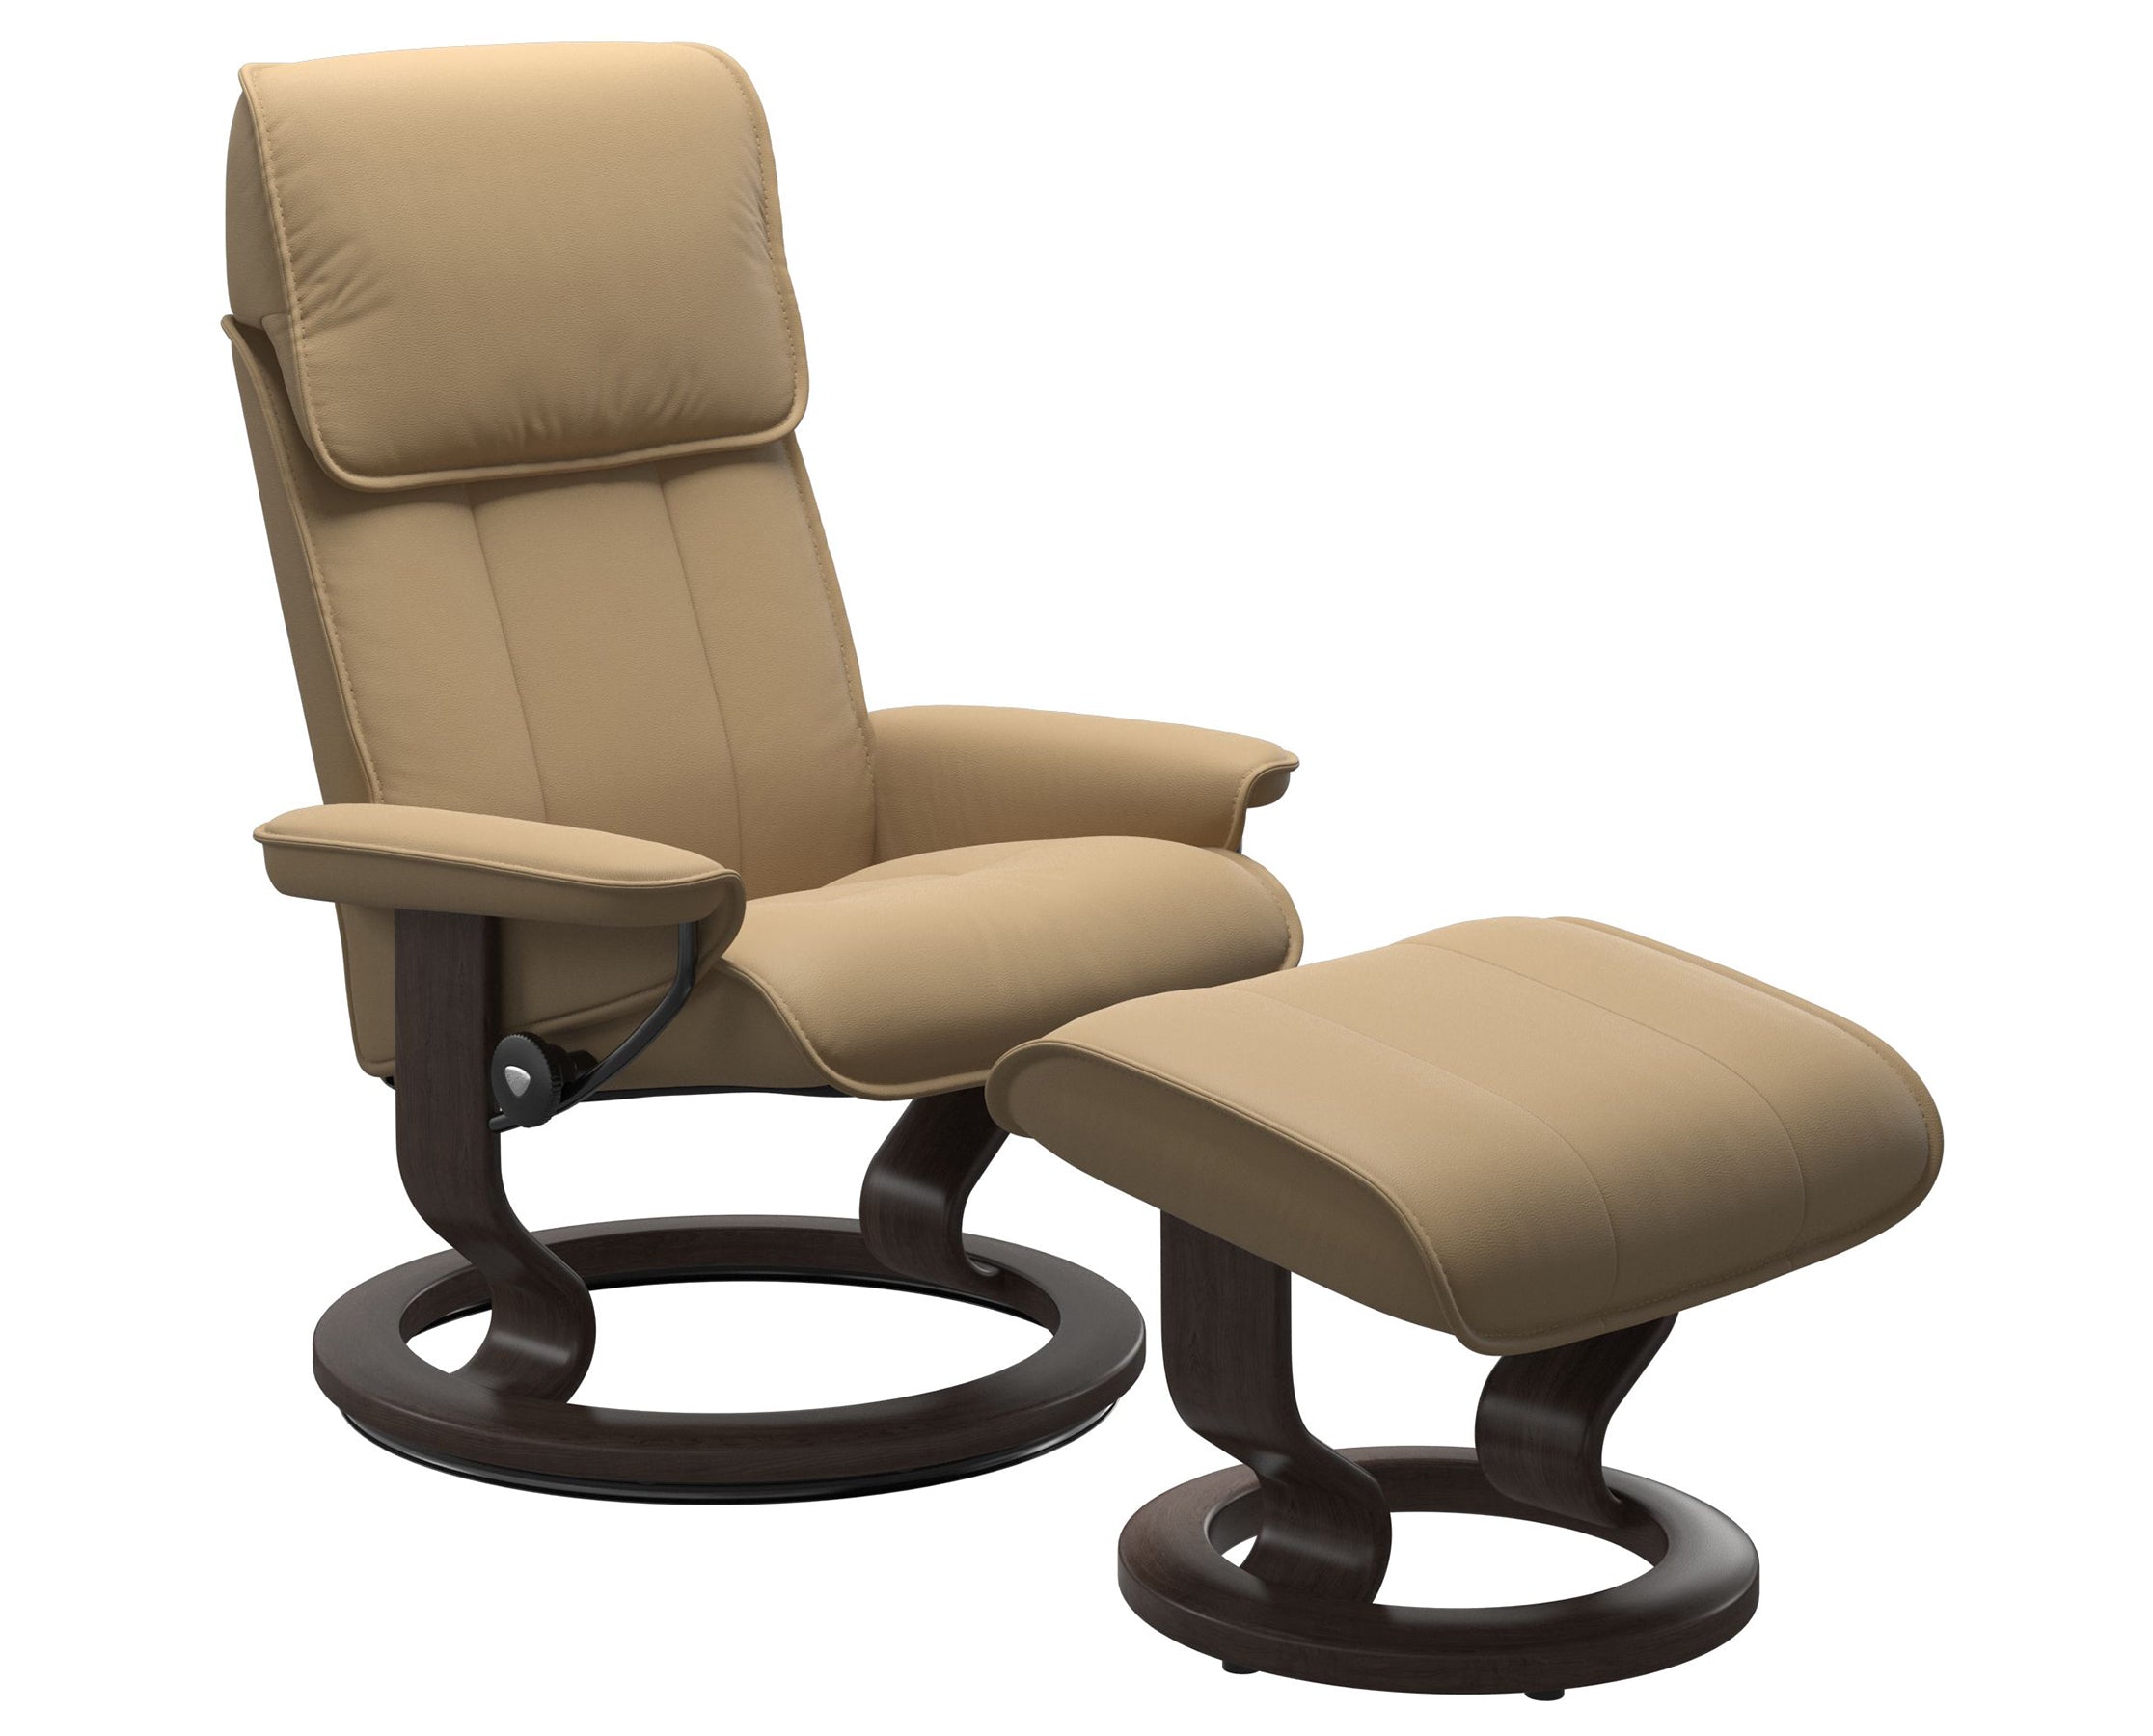 Paloma Leather Sand M/L and Wenge Base | Stressless Admiral Classic Recliner | Valley Ridge Furniture